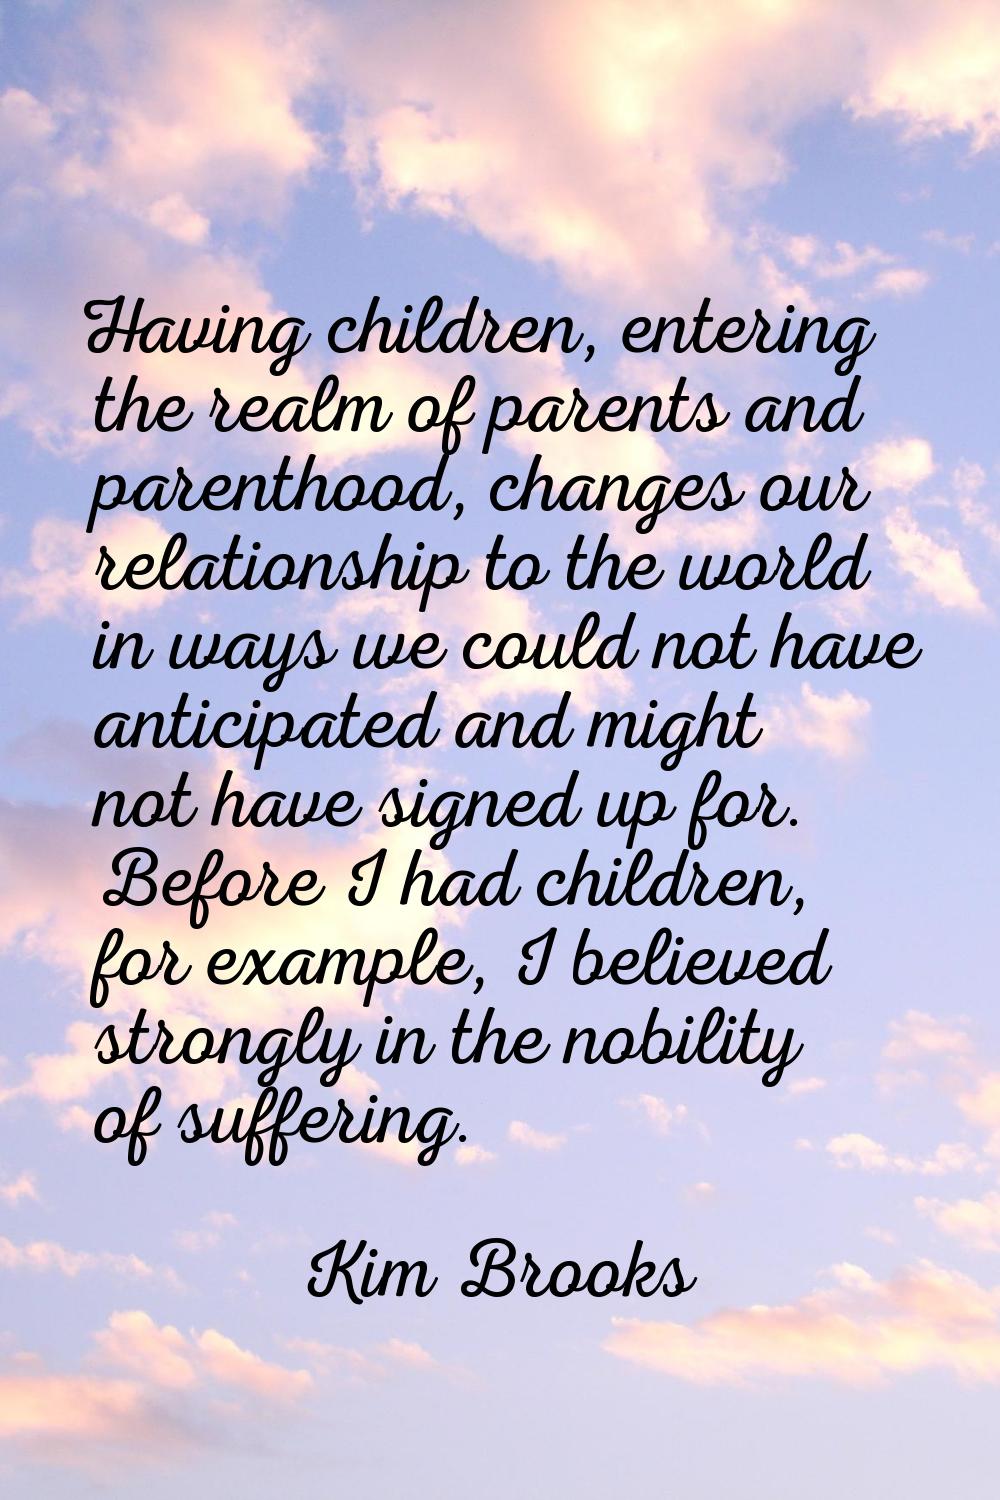 Having children, entering the realm of parents and parenthood, changes our relationship to the worl